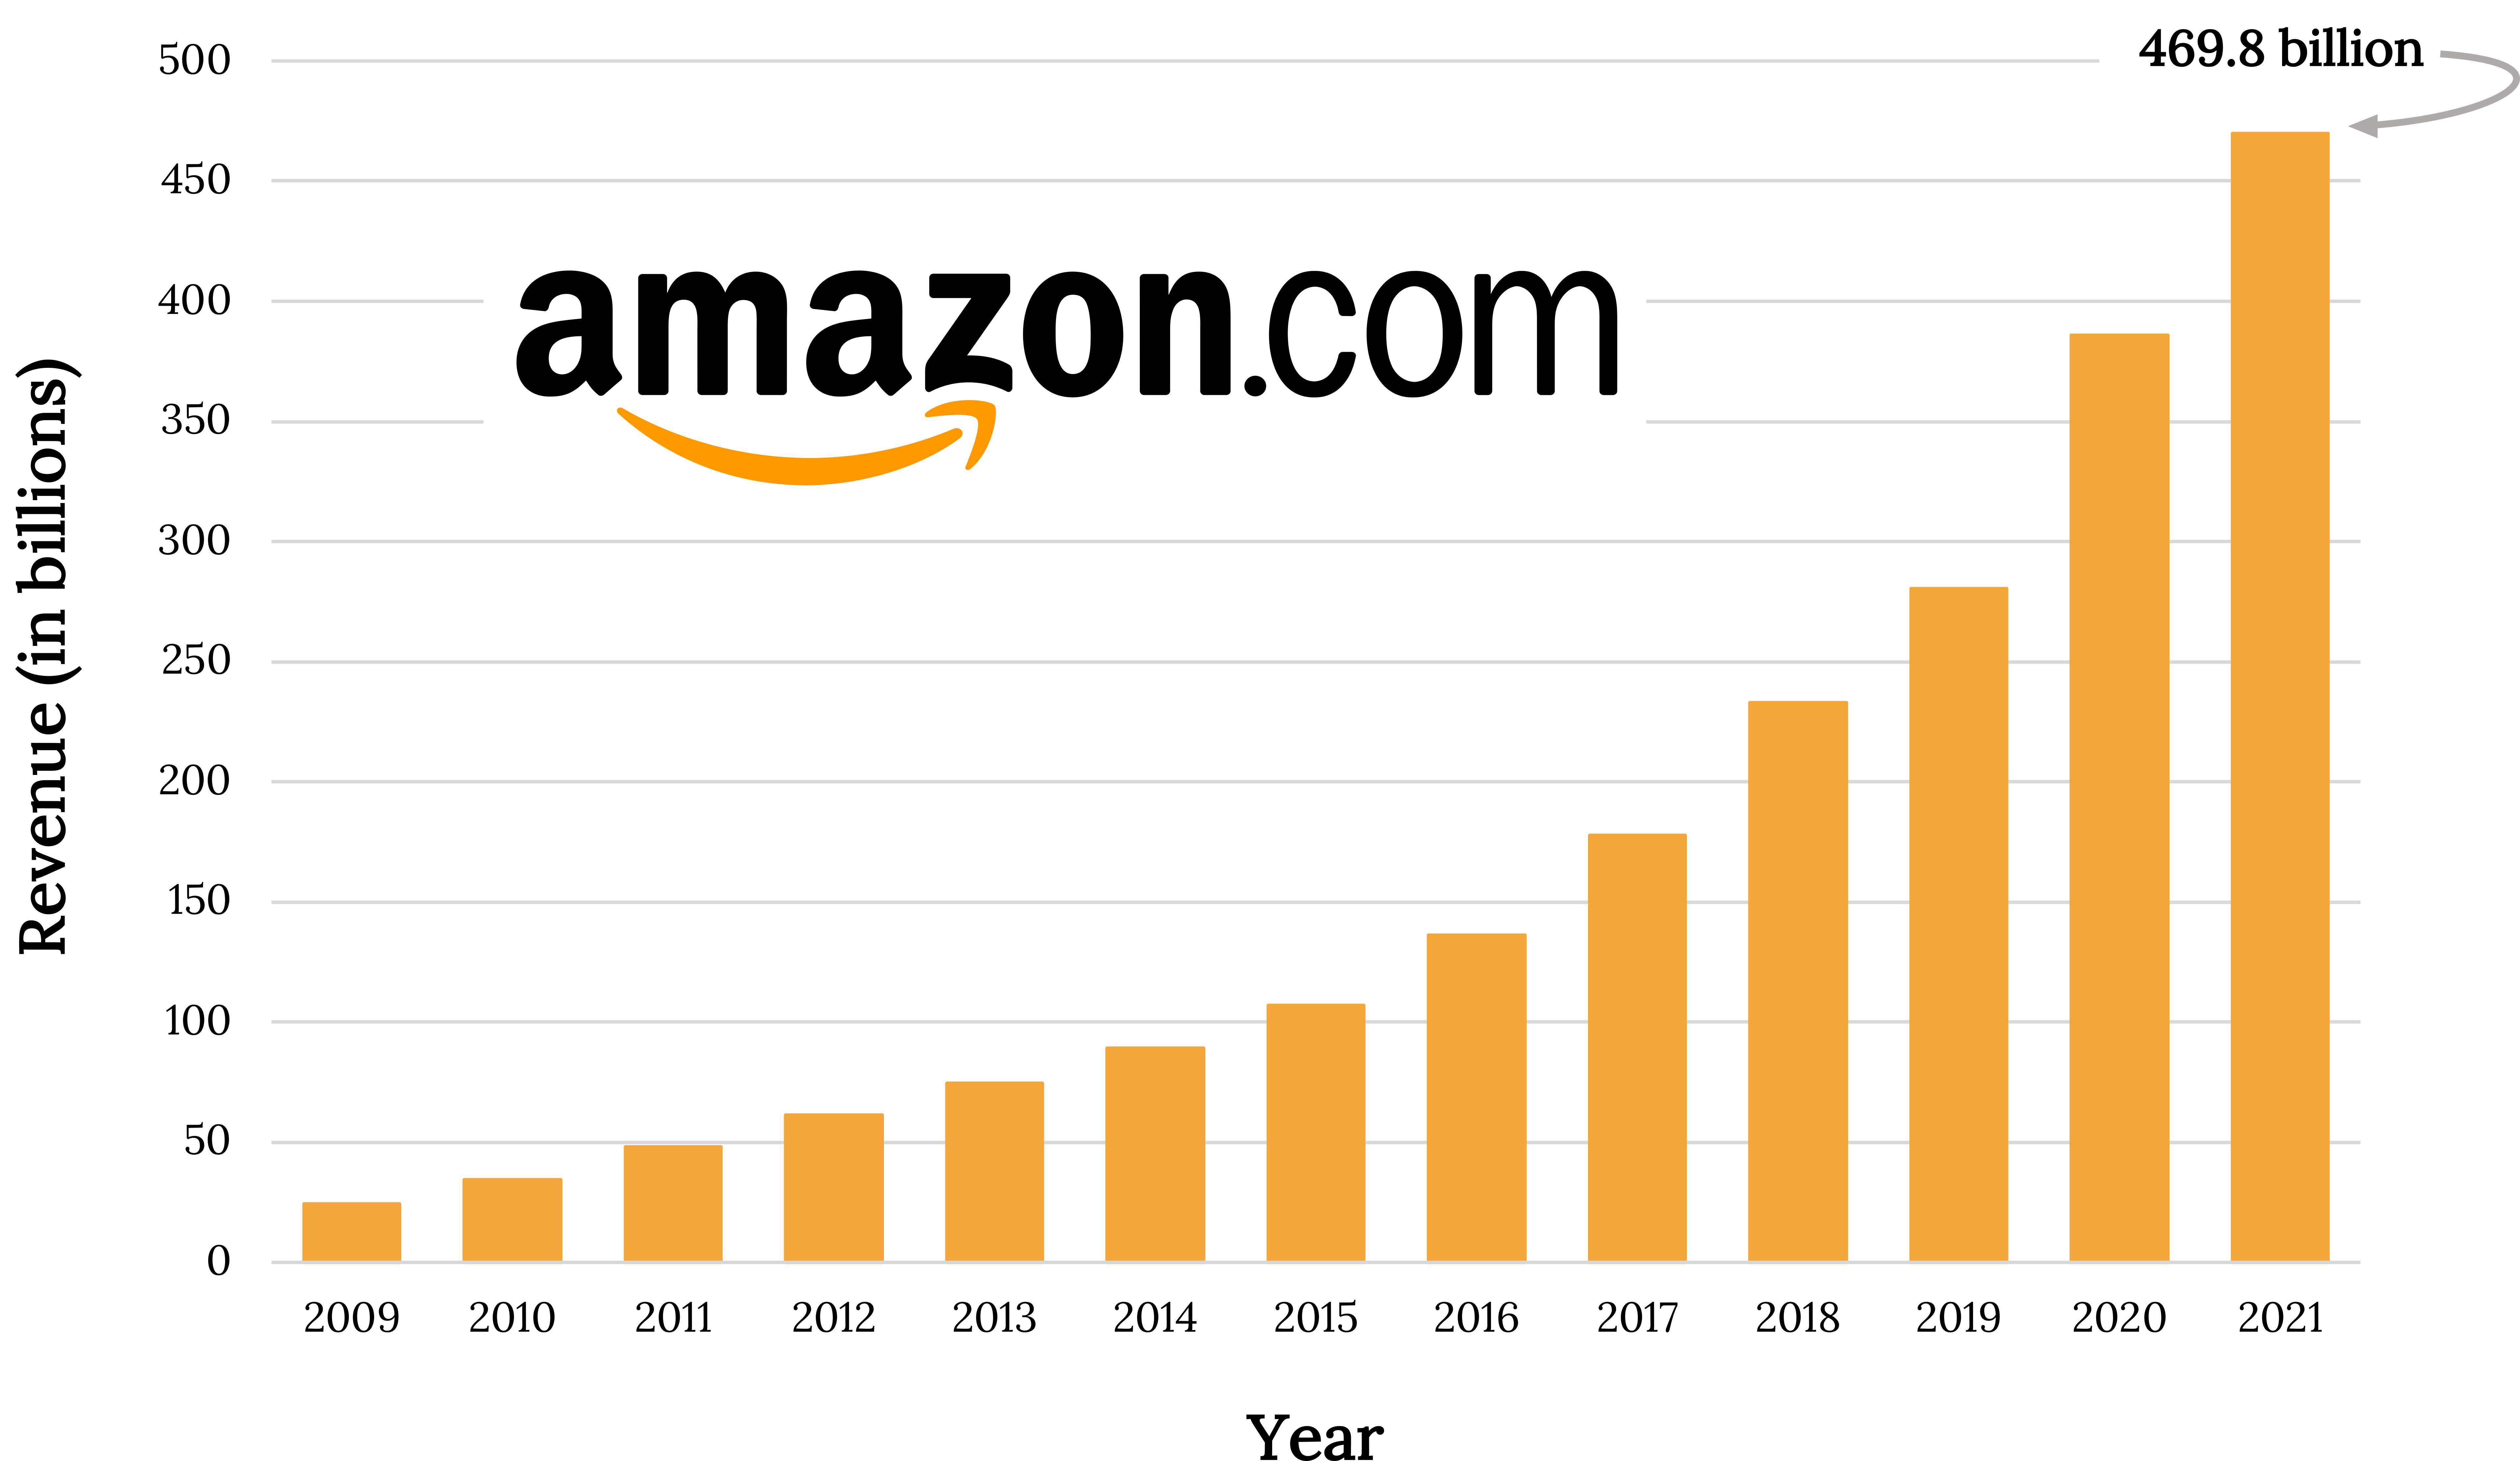 Vertical bar graph of the growth of annual revenue for Amazon.com, with the logo laid over the top of the graph. The x-axis shows the year, from 2009 to 2021 in 1 year increments. The y-axis shows the dollar amount, from $0 to $500 billion. In 2009, revenue equaled roughly 25 billion. Revenue grew consistently to 469.8 billion in 2021.